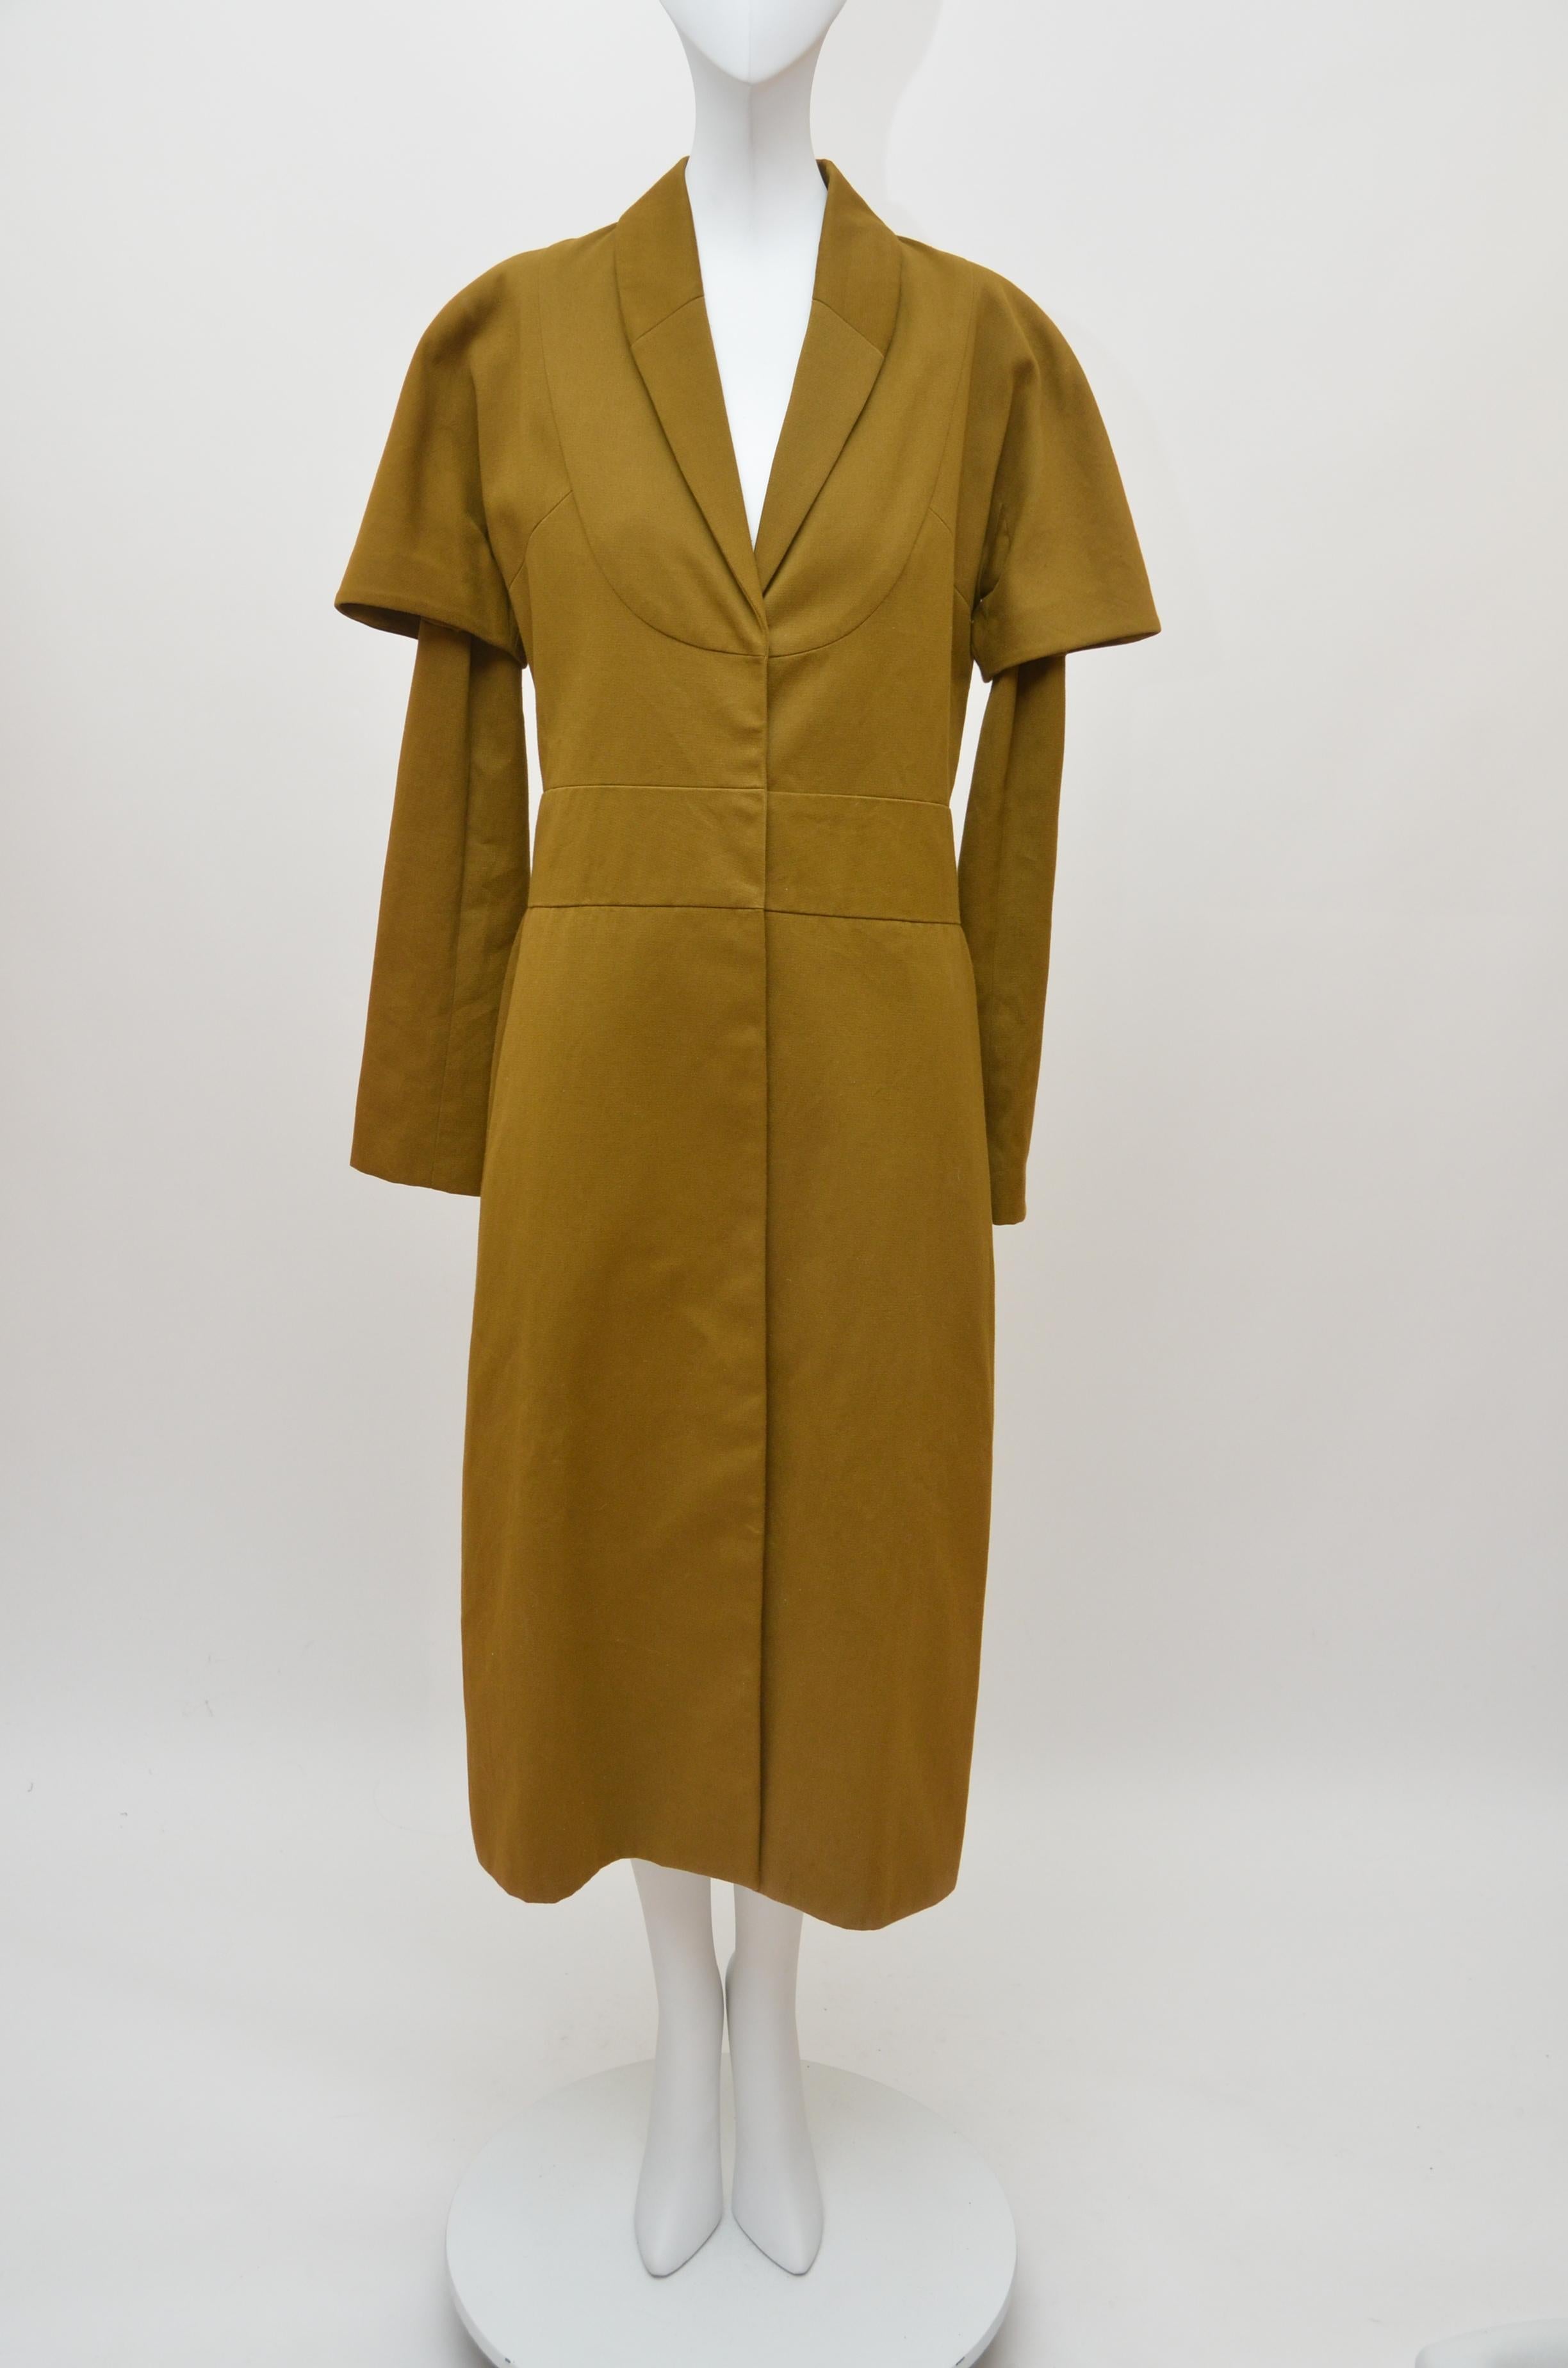 A rare and early Comme des Garçons 'Obi' coat, probably late 1970s, with unusual blue on ivory woven satin label, of heavy cotton, lined in polyester crêpe, with curved front 'bib' panel, under and over sleeves, the waistband applied to the rear